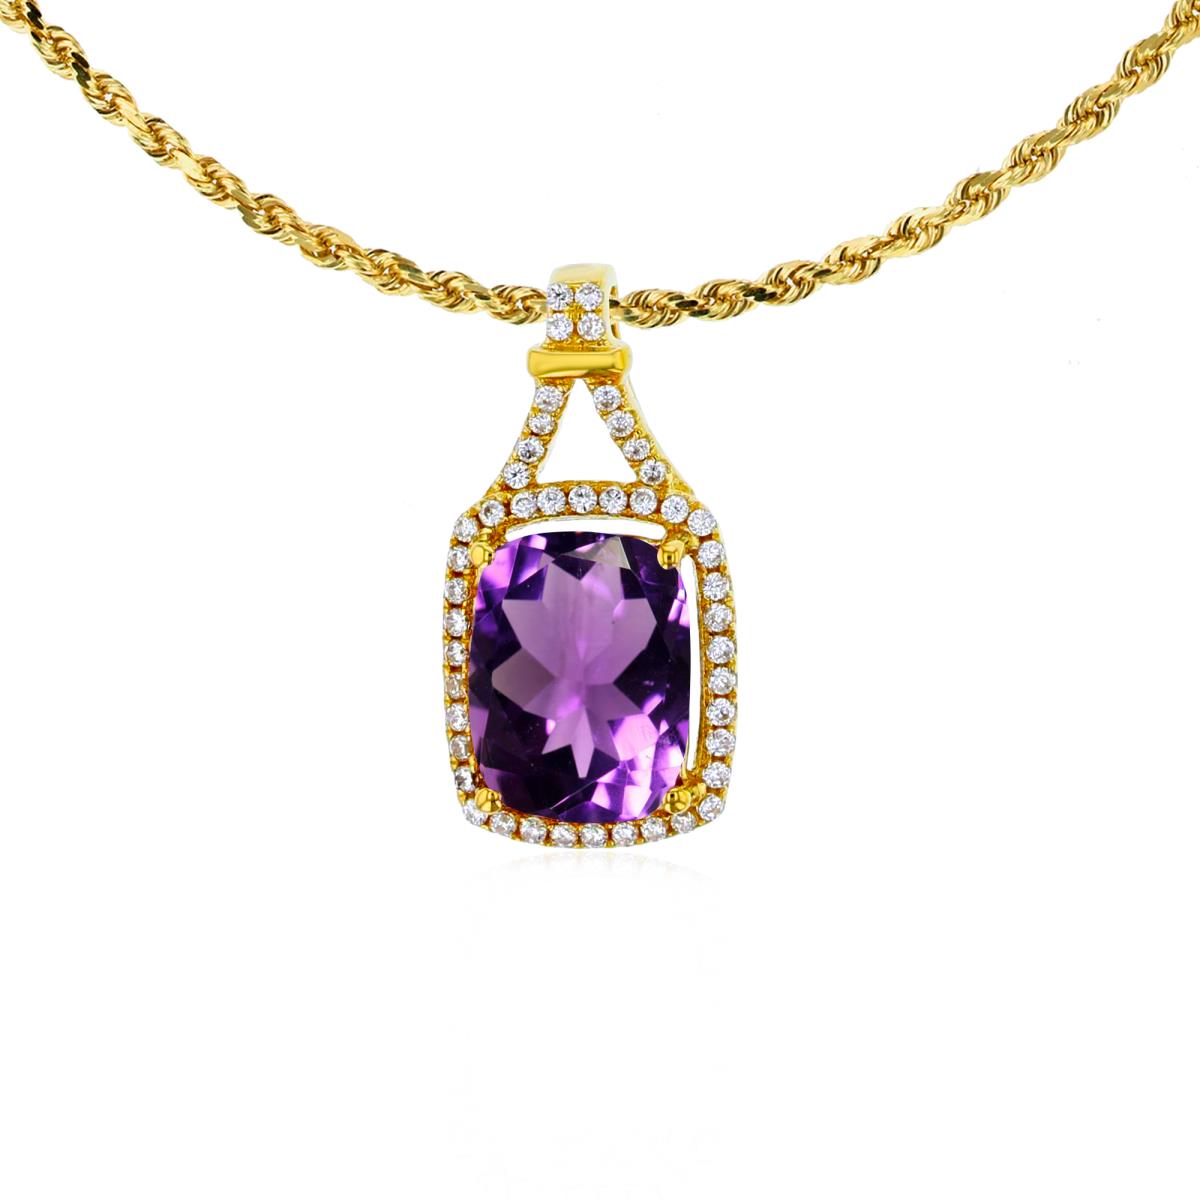 14K Yellow Gold 8x6mm Cushion Amethyst & 0.13 CTTW Rd Diamonds Halo 18" Rope Chain Necklace